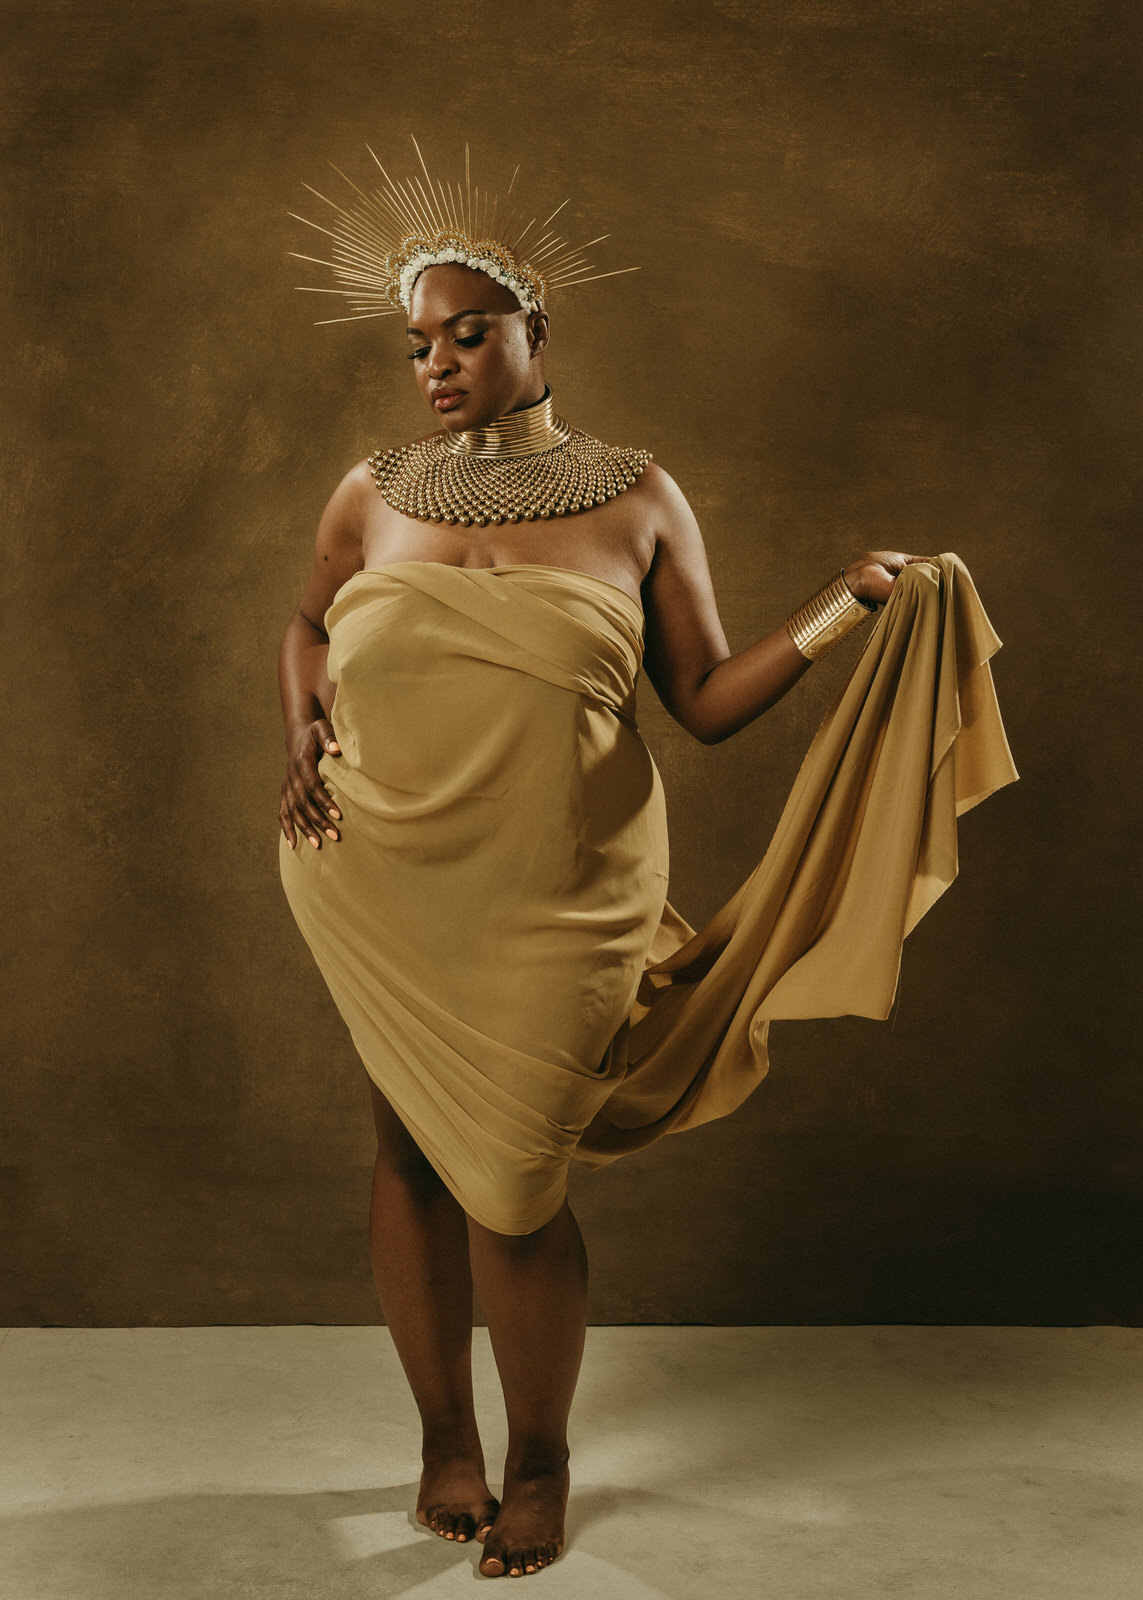 vancouver boudoir photographer image of plus size black woman with alopecia wearing gold fabric and sun crown